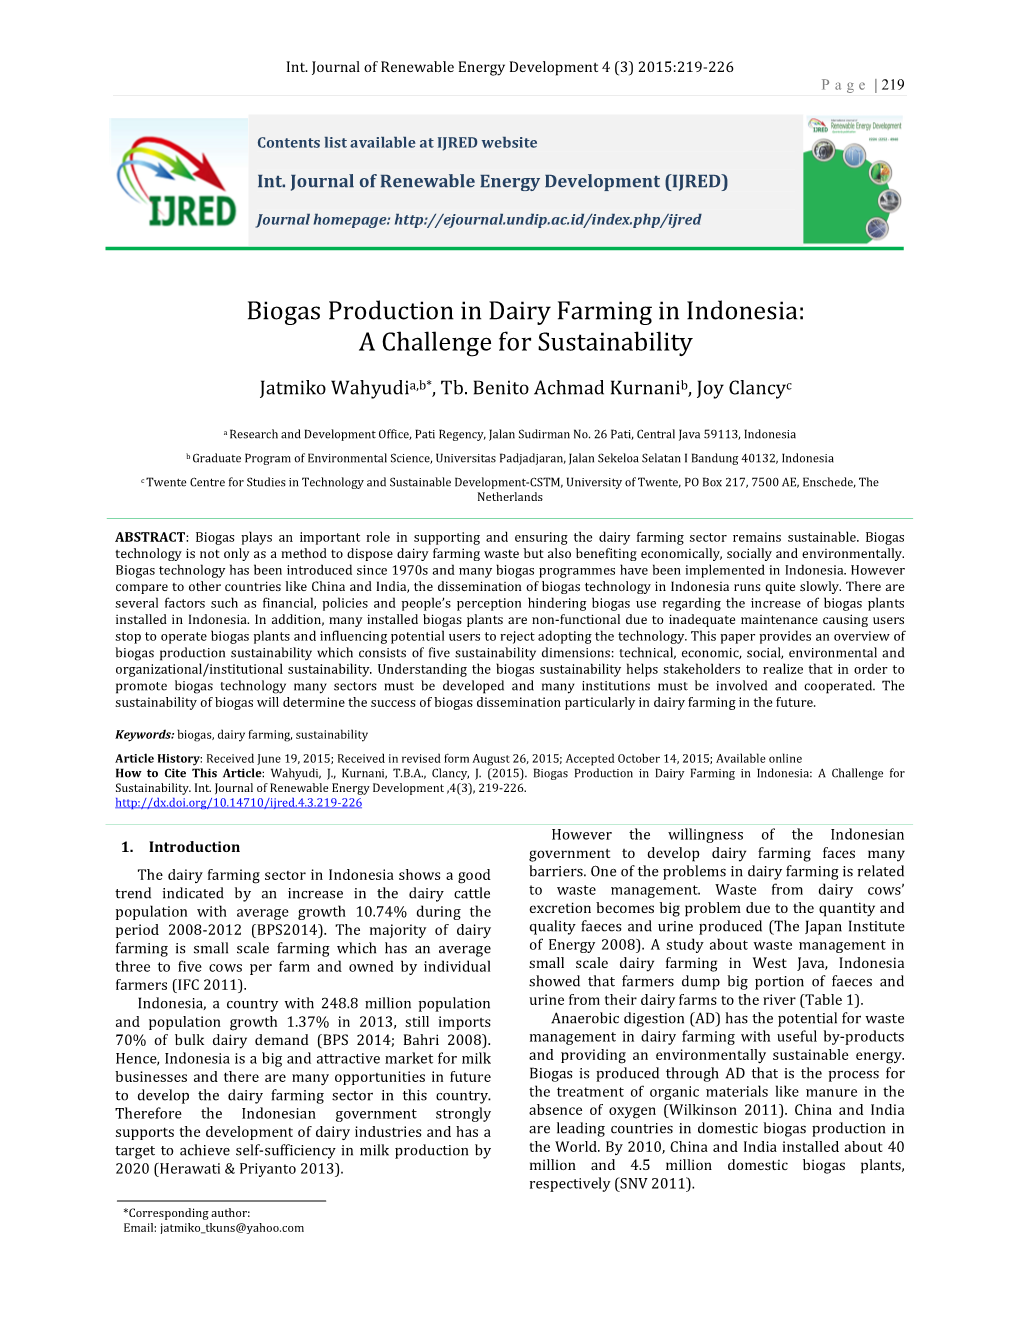 Biogas Production in Dairy Farming in Indonesia: a Challenge for Sustainability A,B* B C Jatmiko Wahyudi , Tb